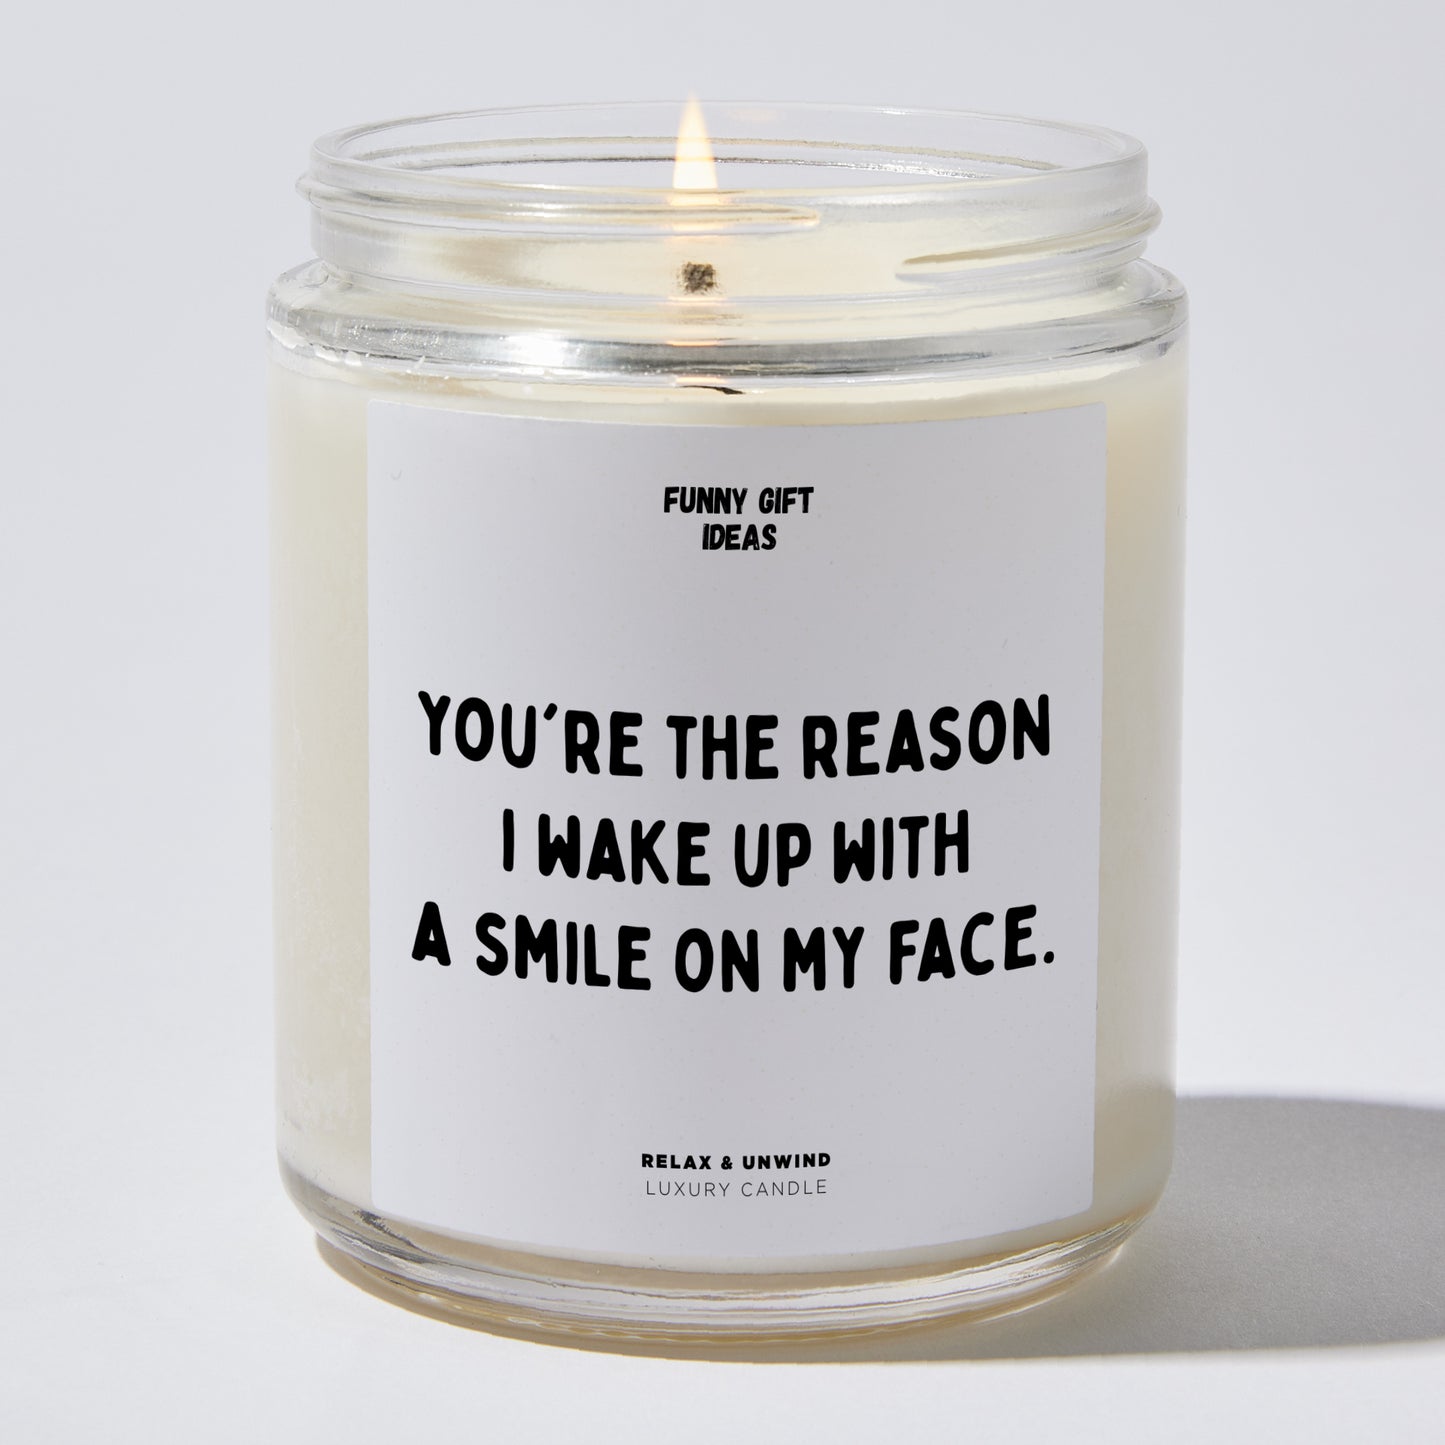 Anniversary Present - You're the Reason I Wake Up With a Smile on My Face. - Candle